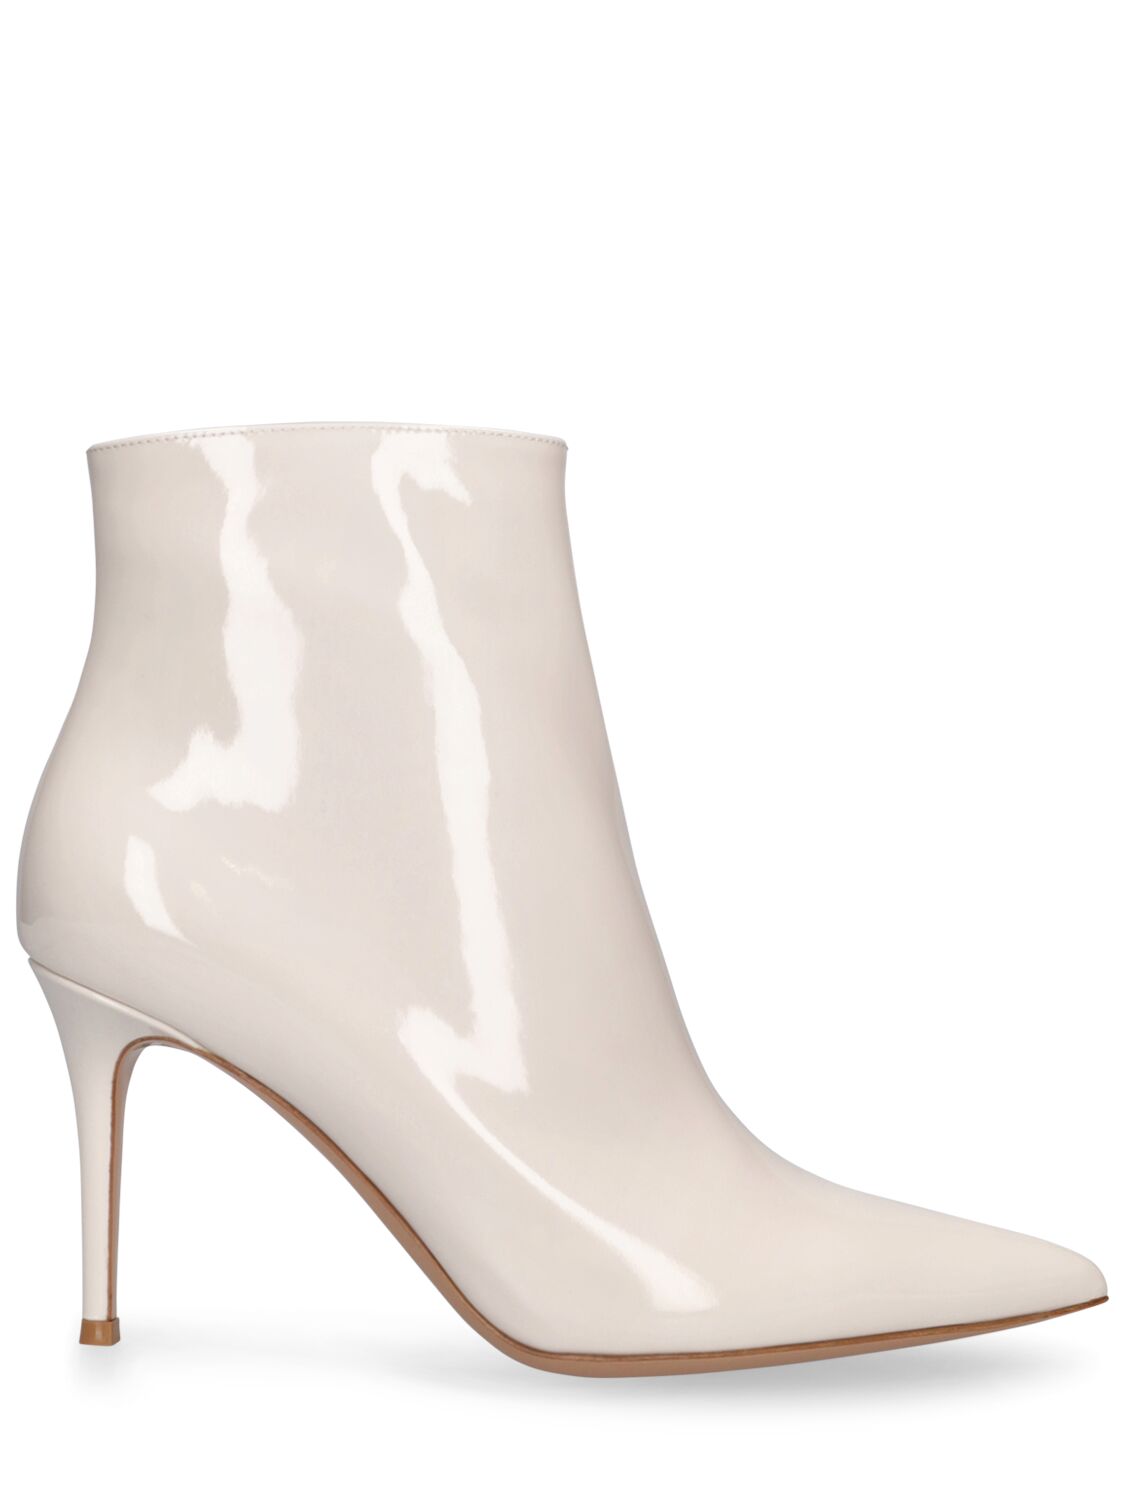 Gianvito Rossi 85mm Patent Leather Ankle Boots In Off White